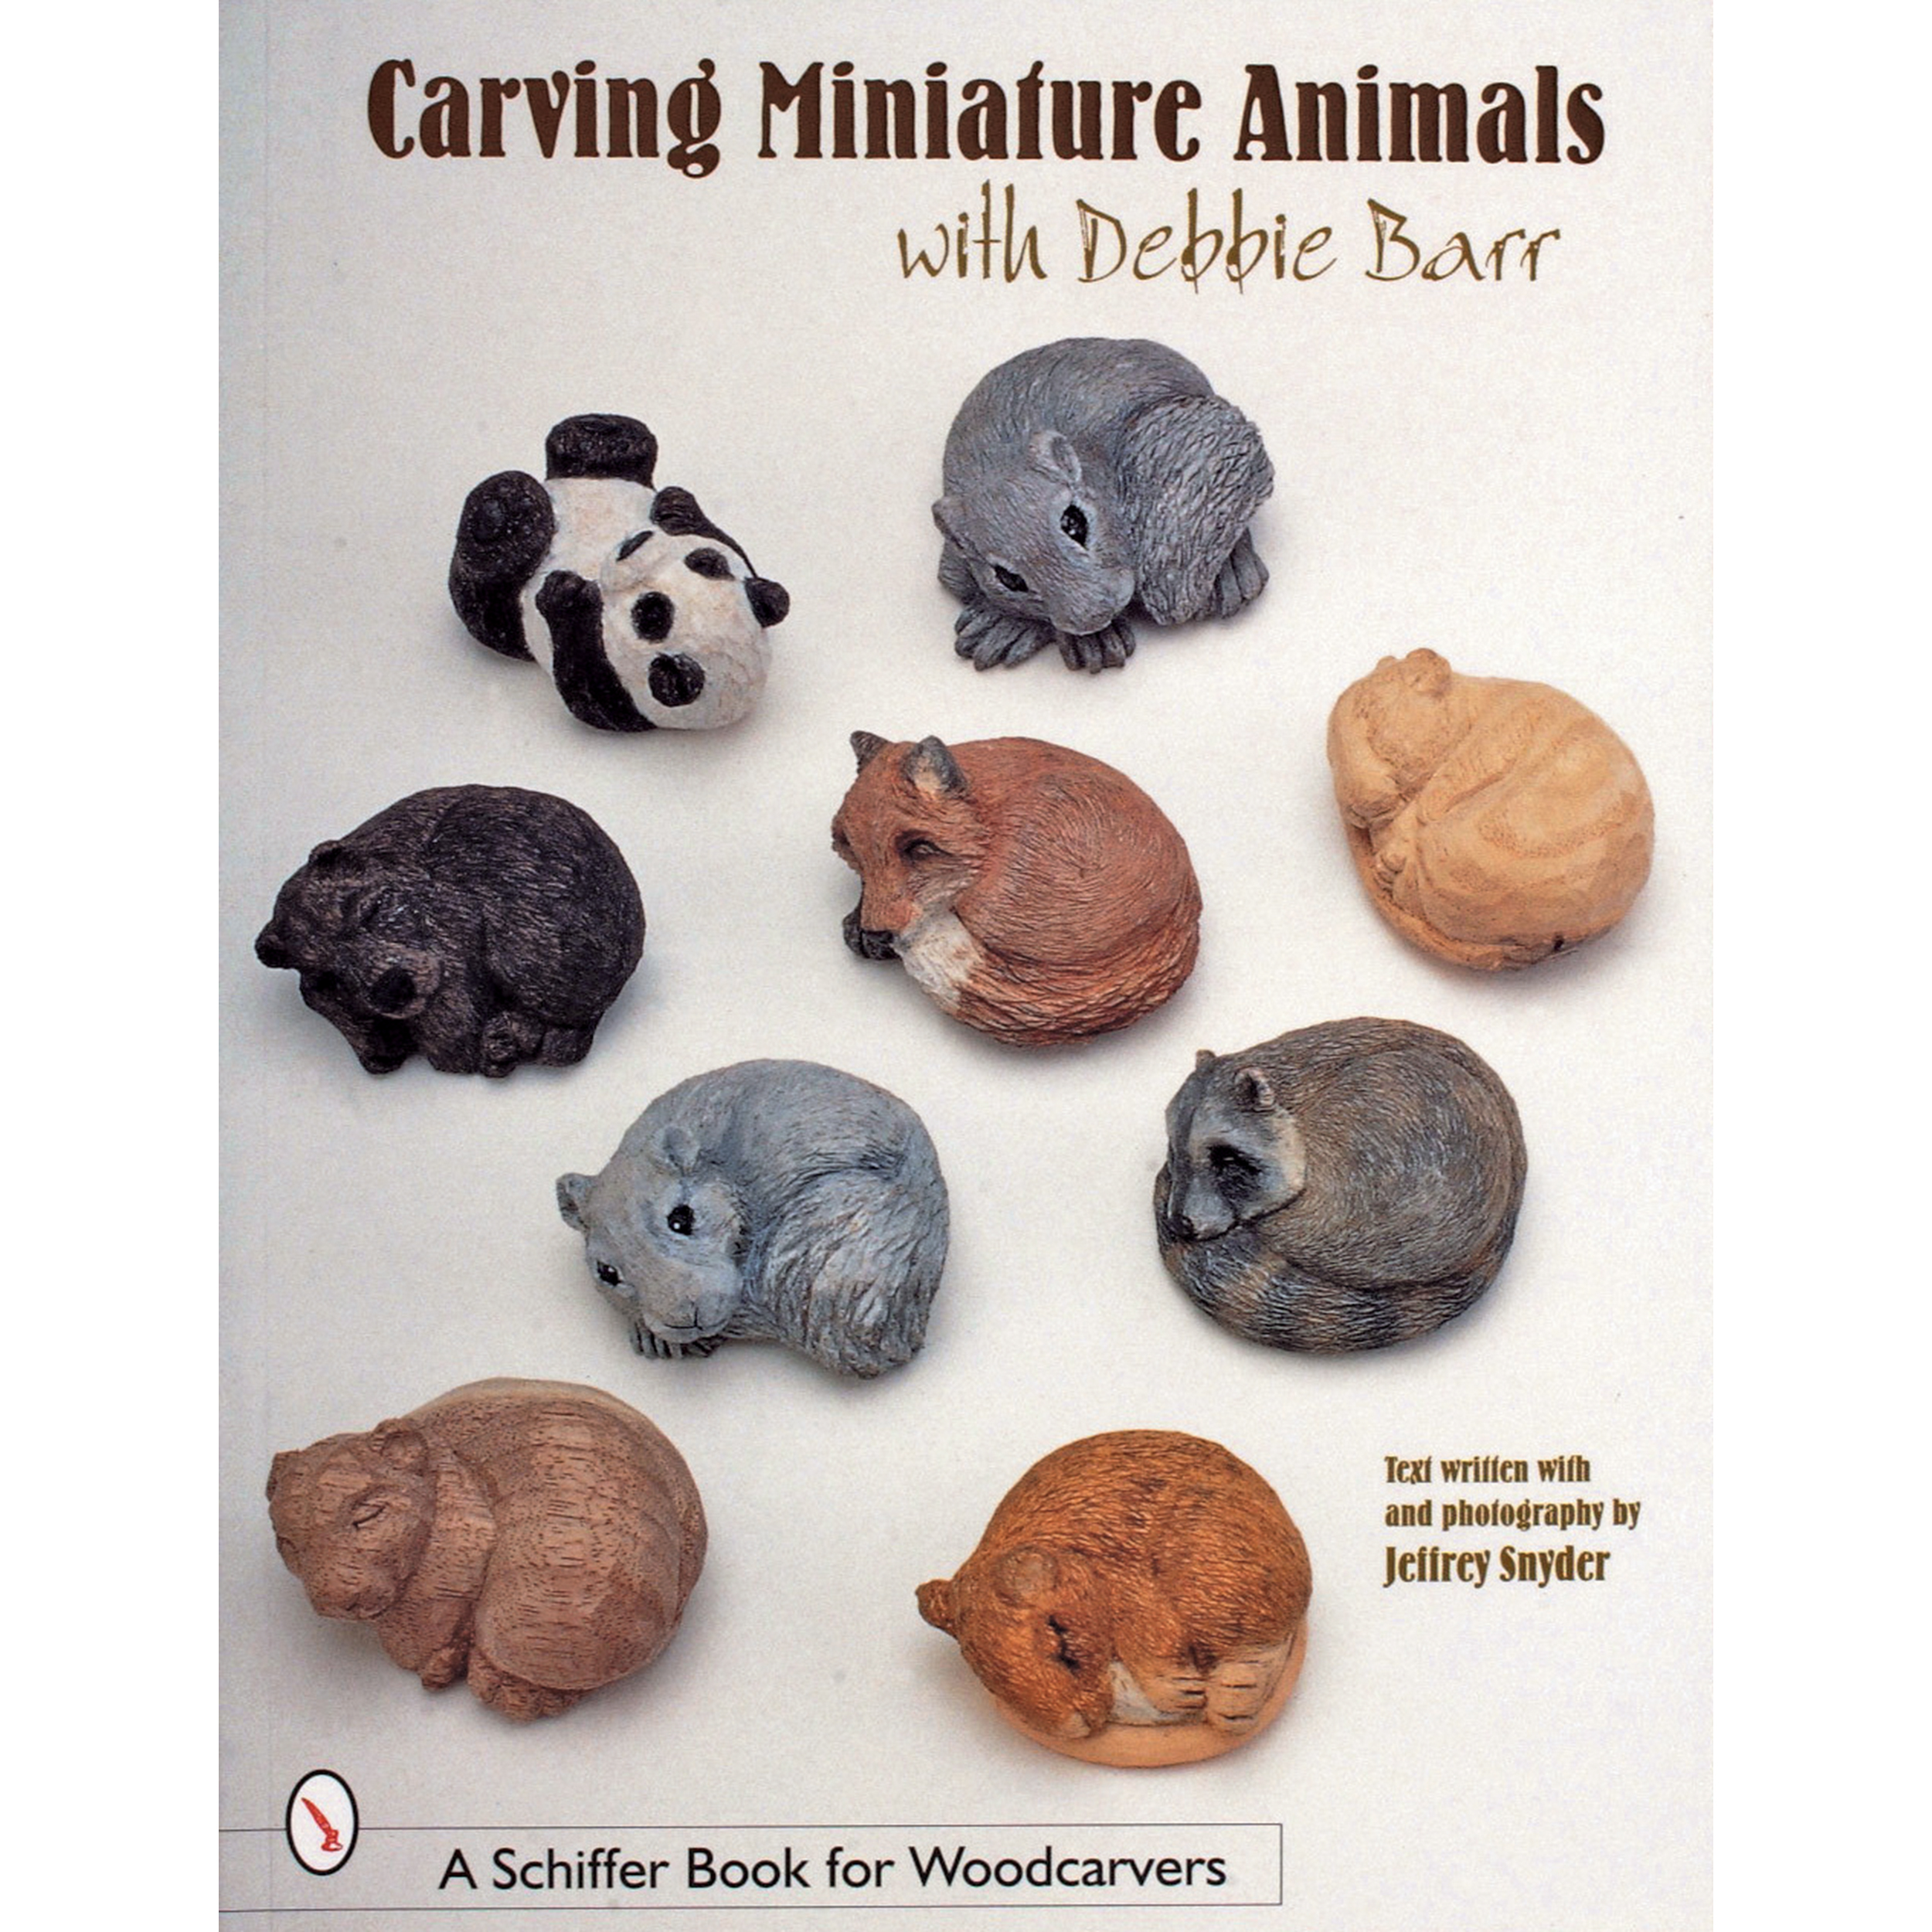 Carving Miniature Animals With Debbie Barr